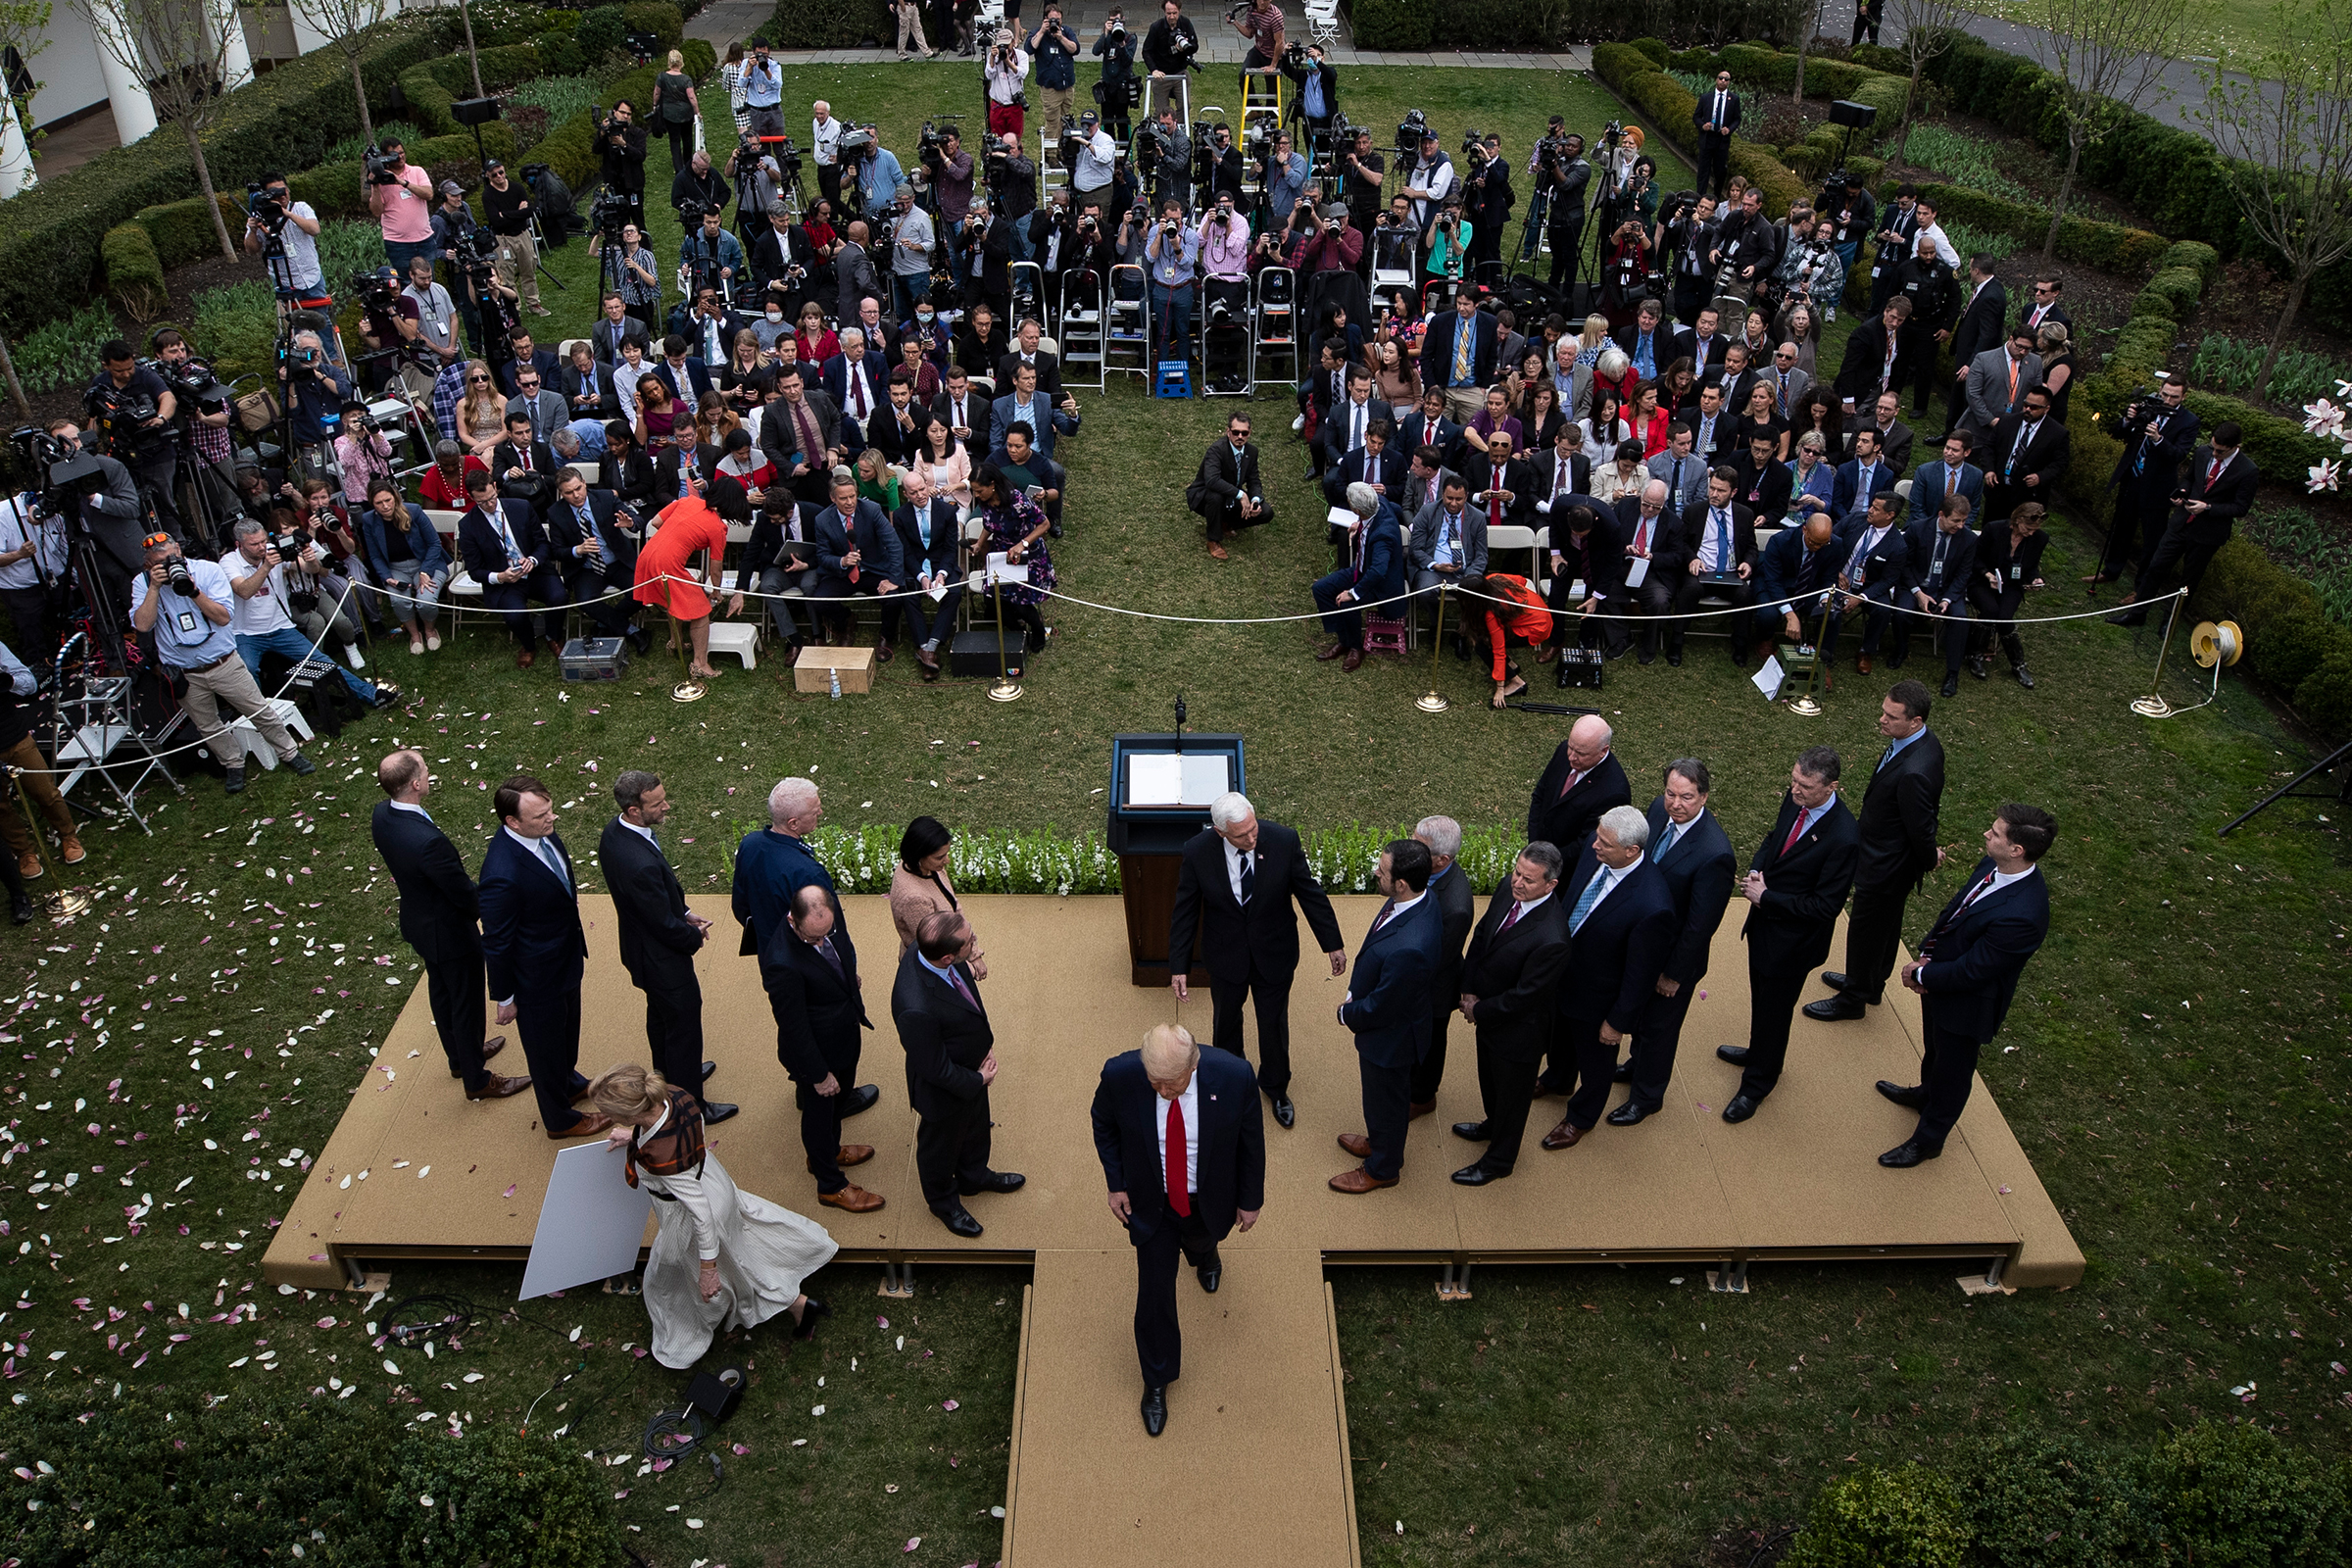 President Trump leaves the podium after announcing a national emergency during a news conference about the coronavirus at the White House in Washington, D.C., on March 13. (Alex Brandon—AP)